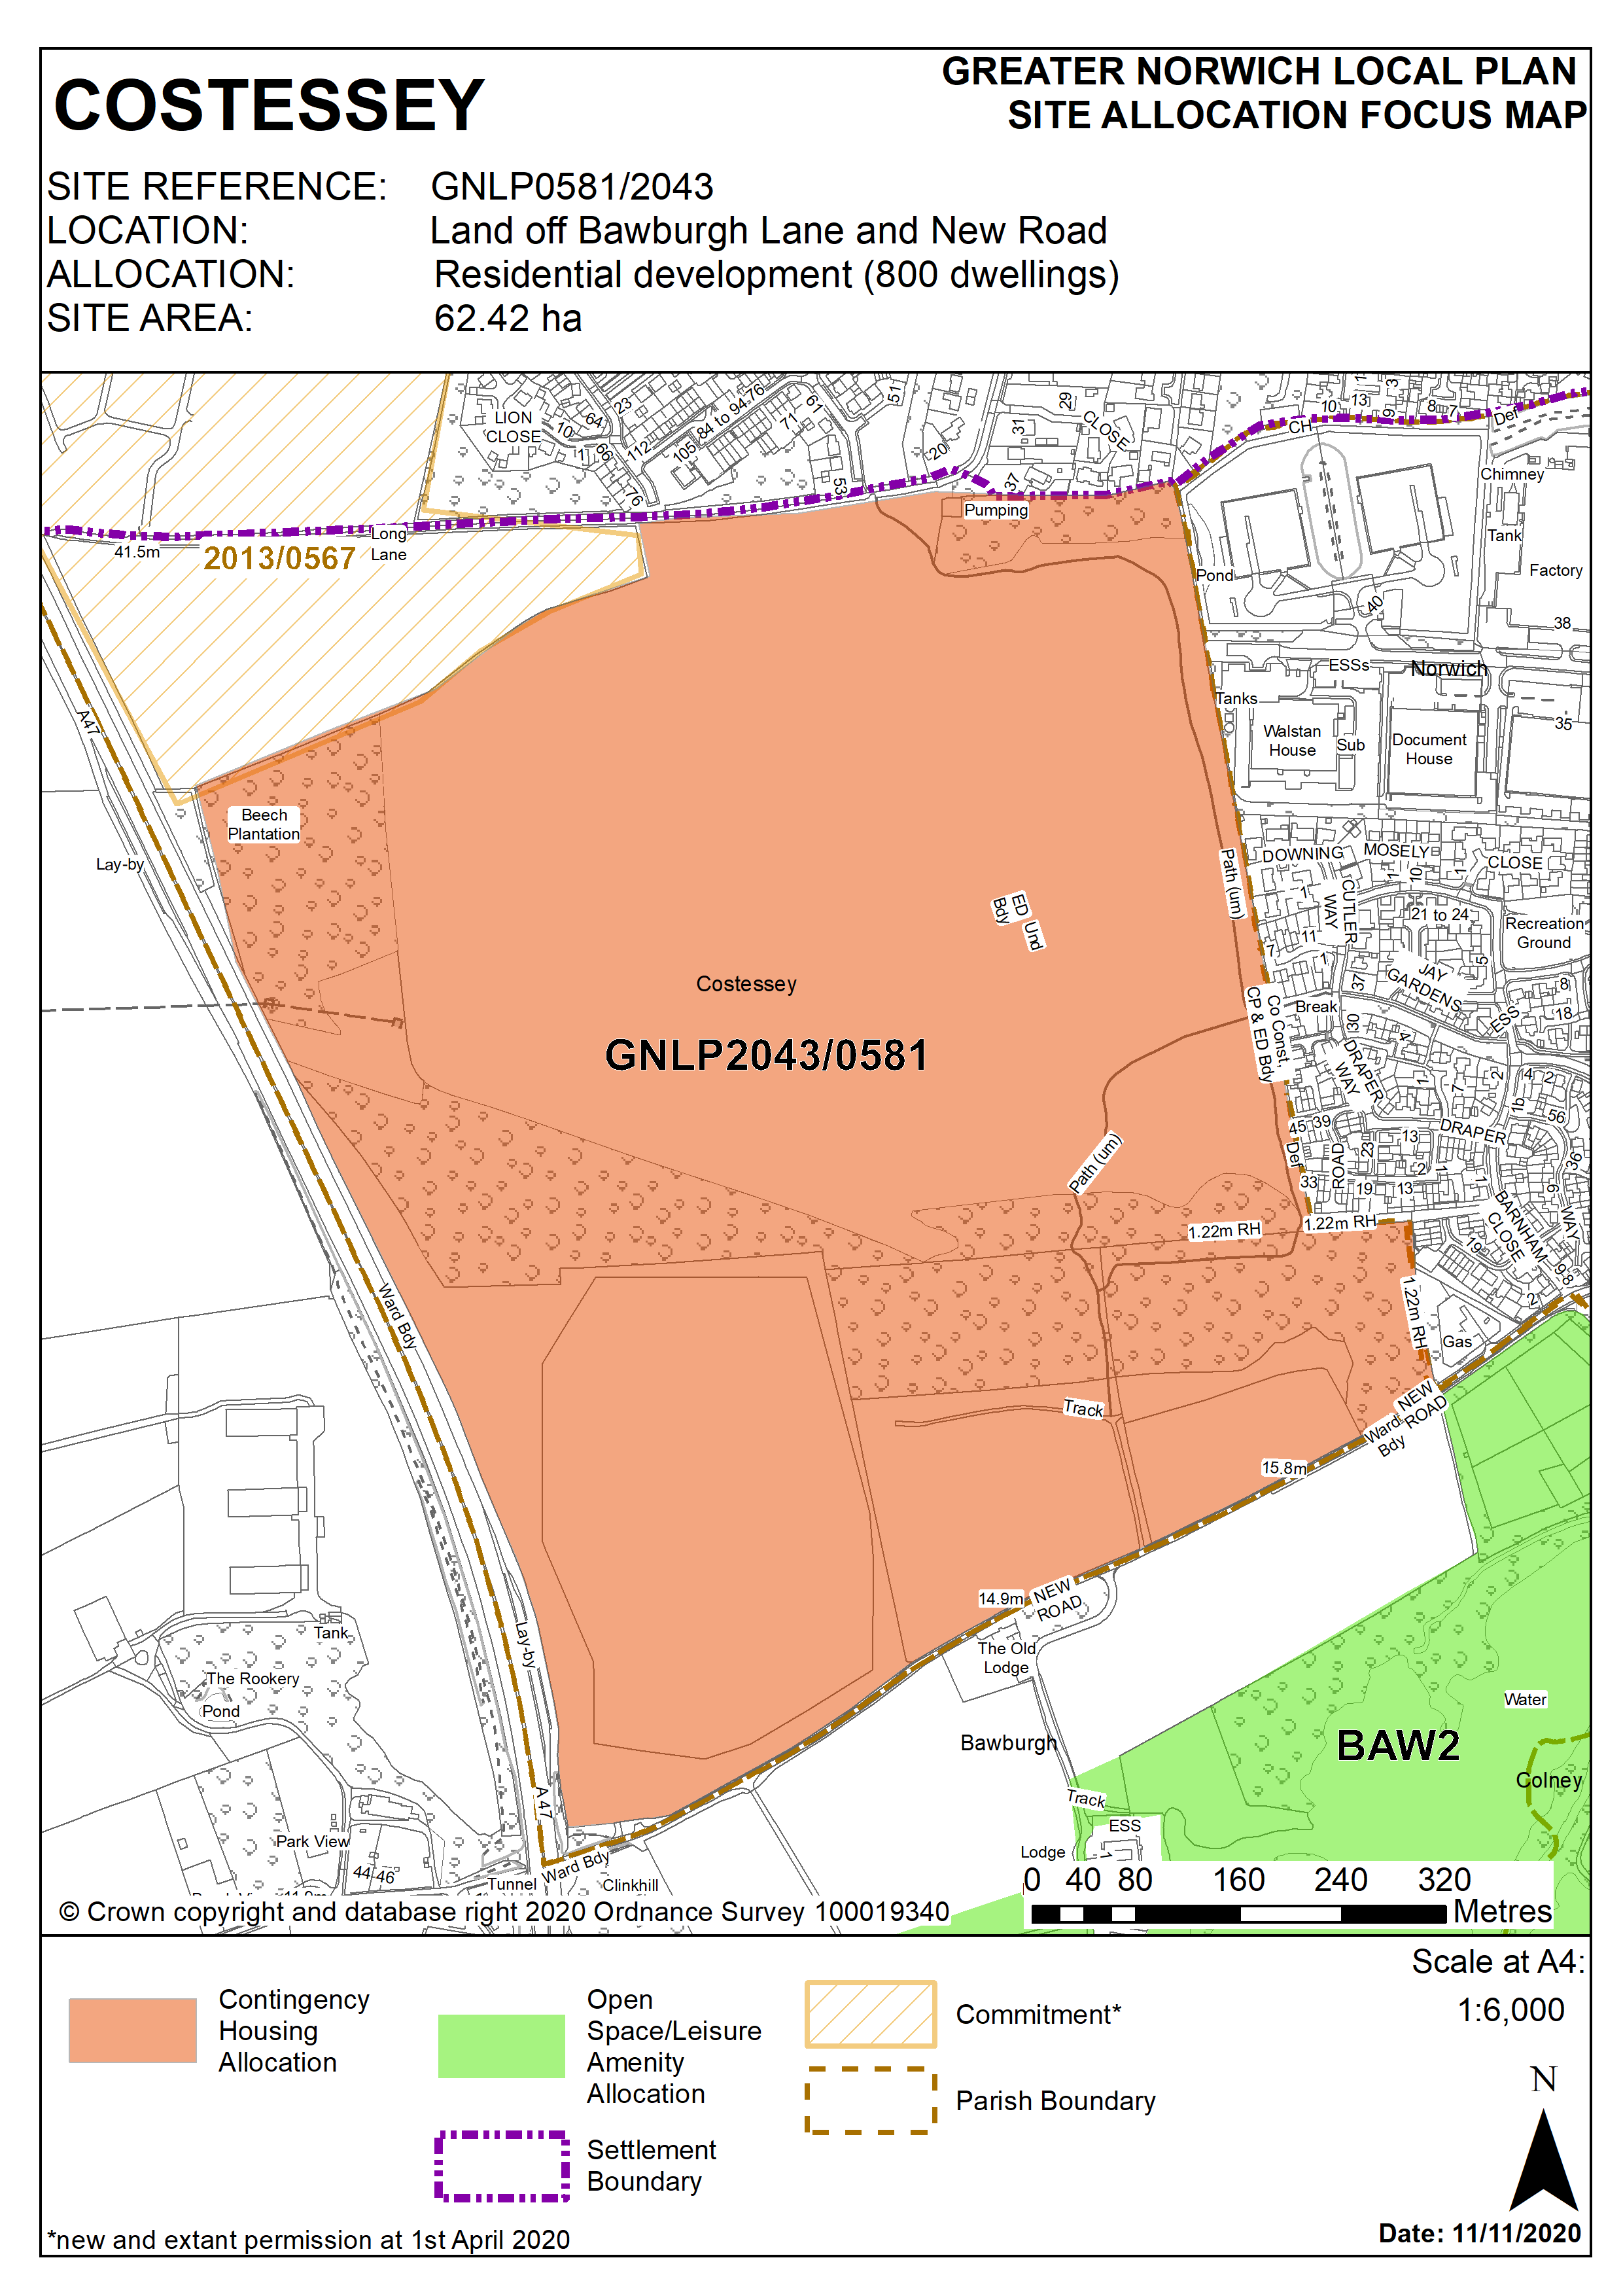 GNLP0581/2043 Policy Map